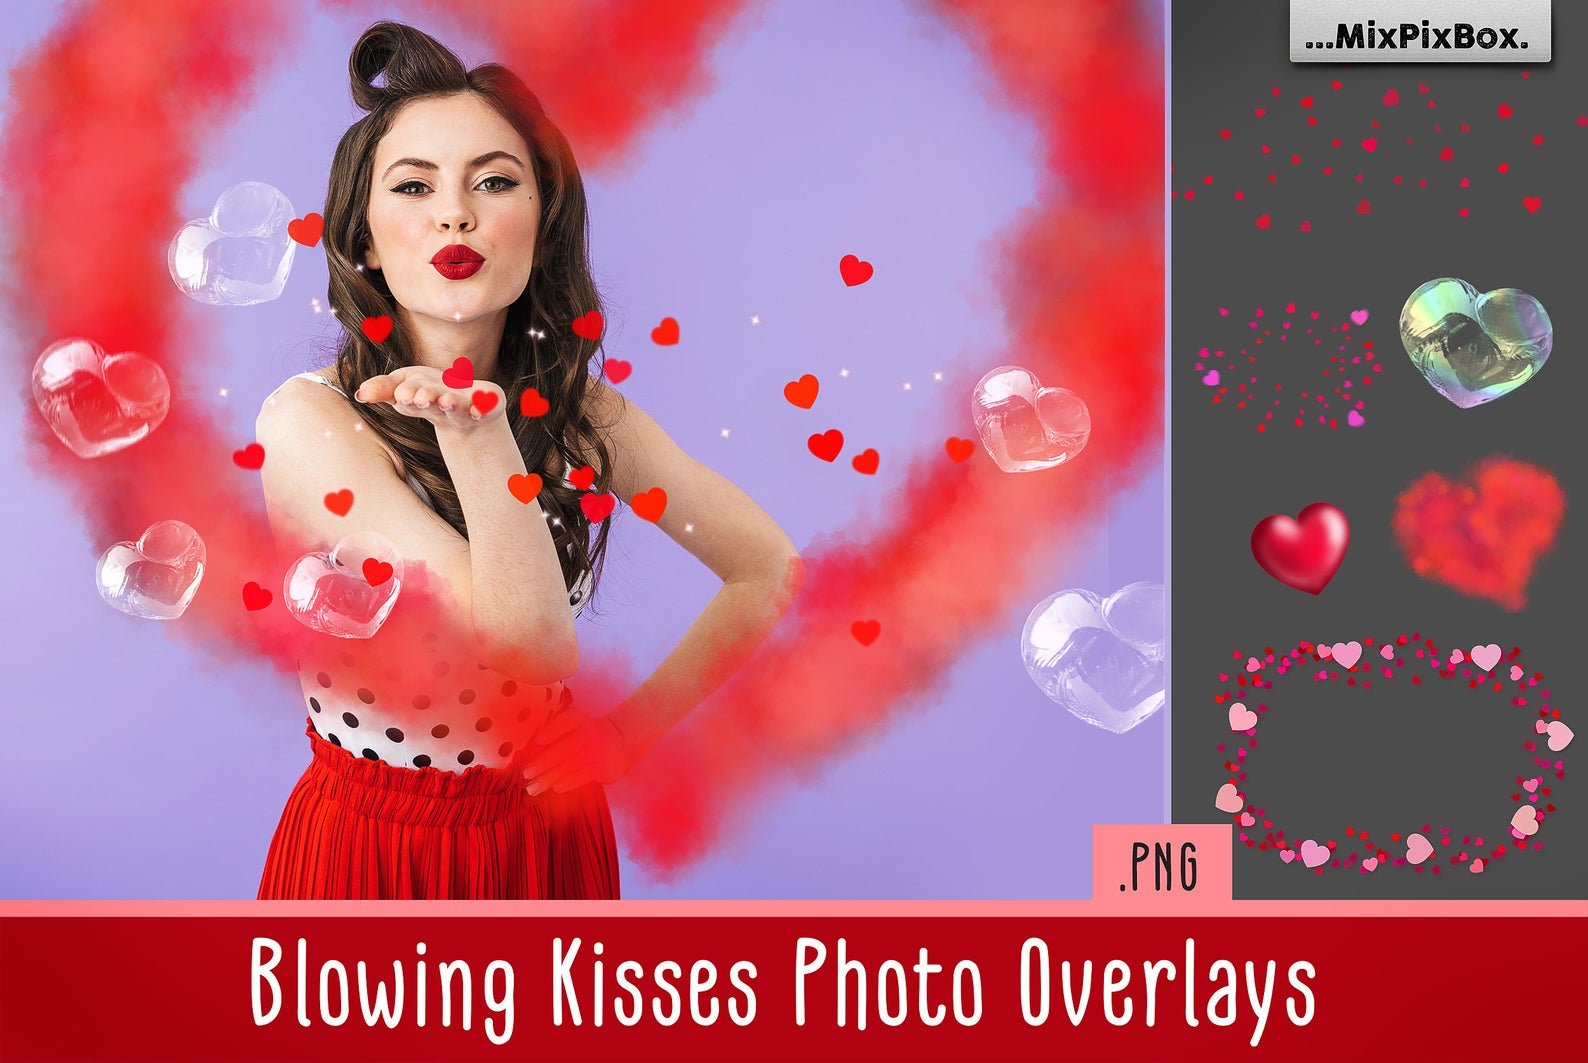 Blowing Kisses Photo Overlayscover image.